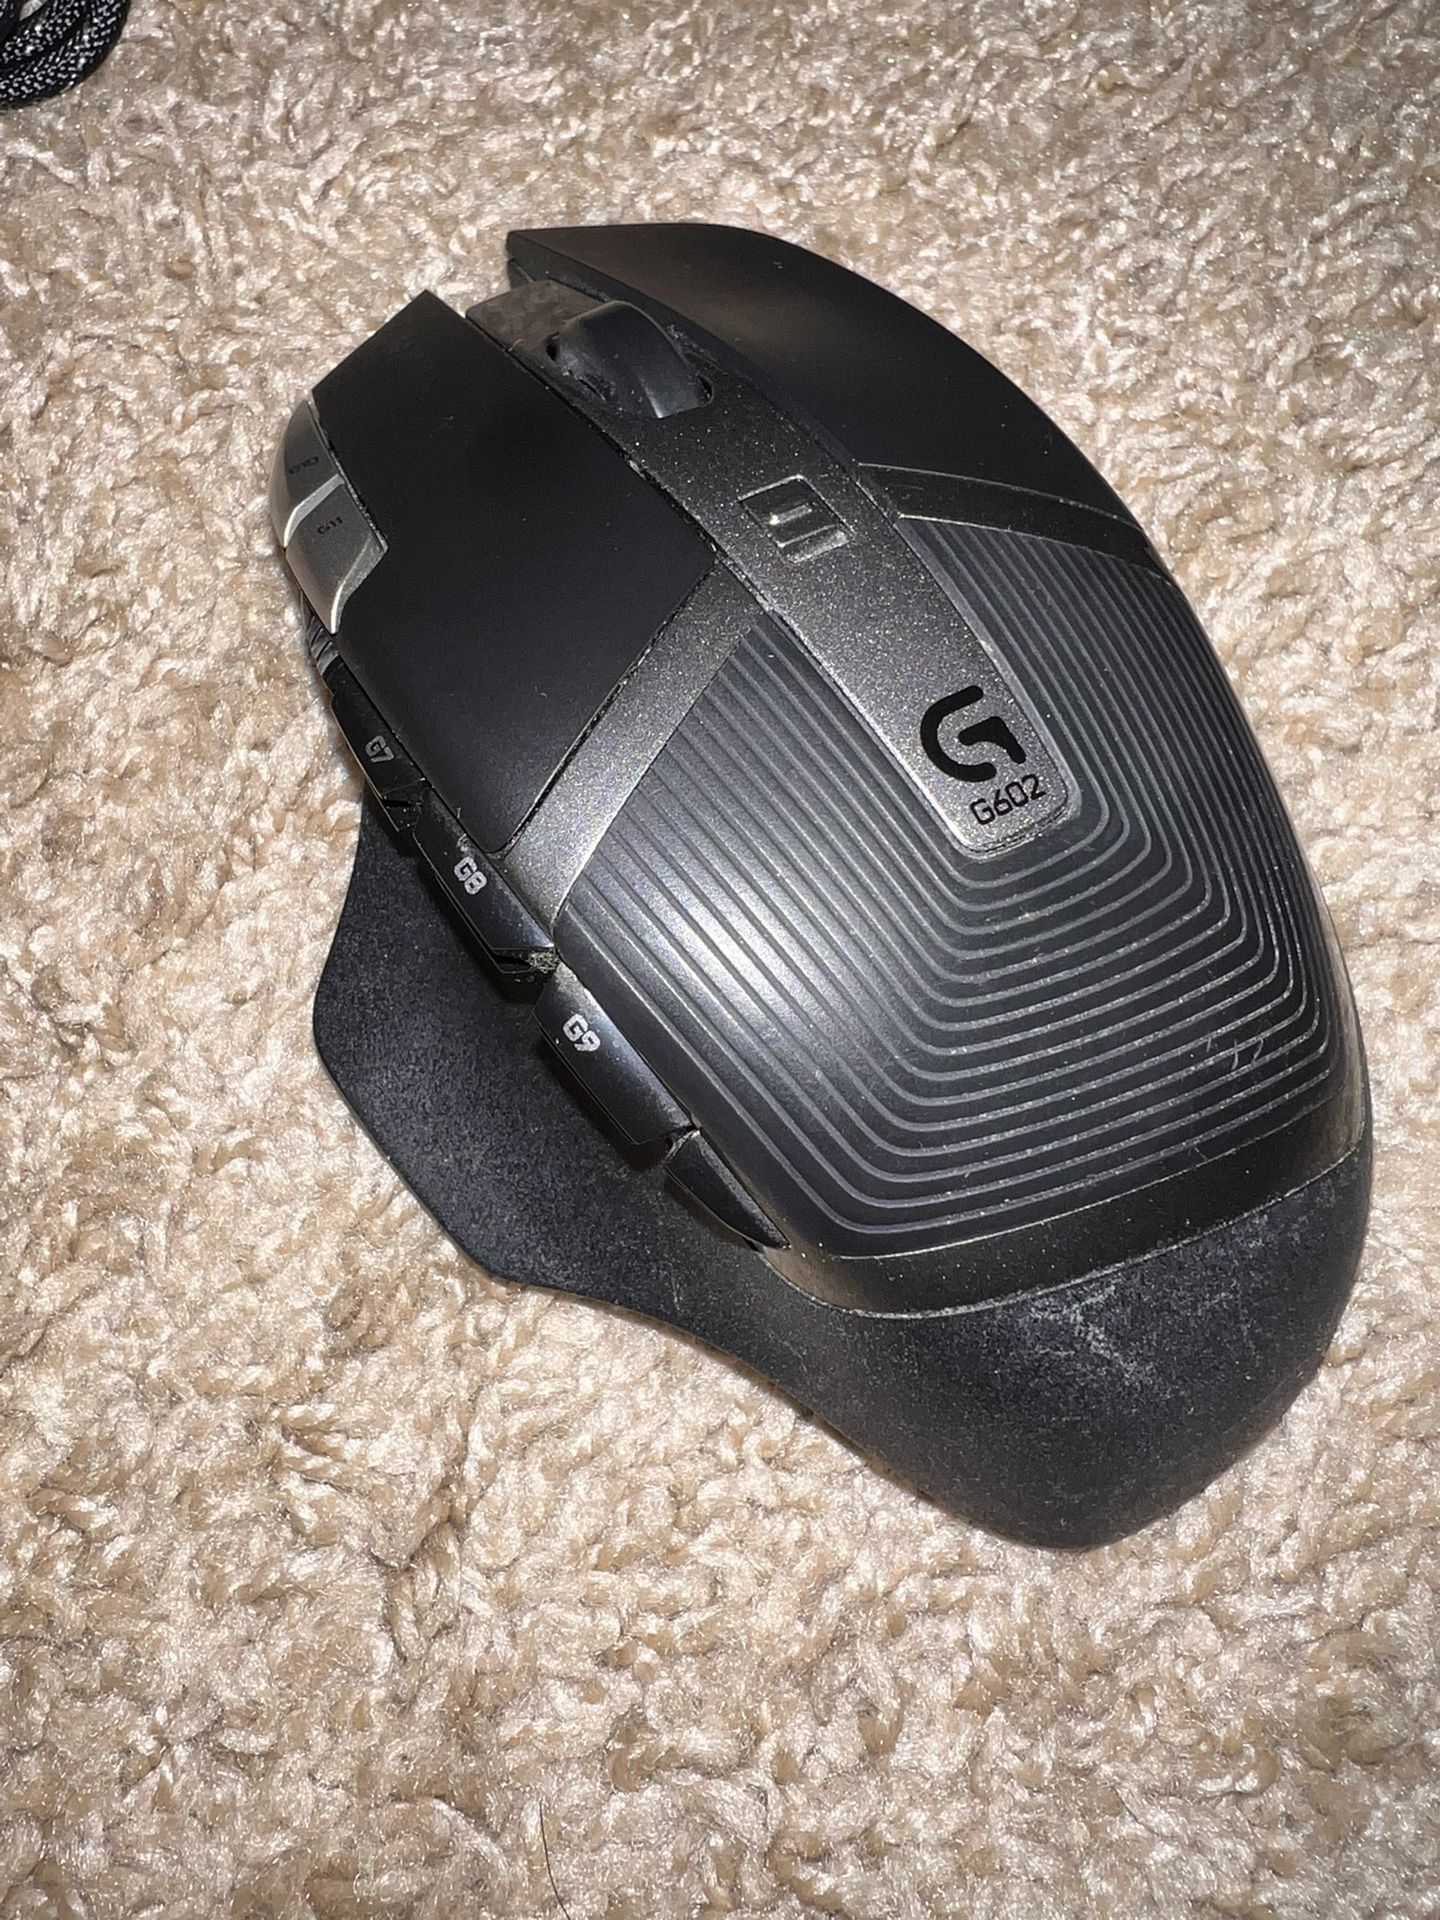 Logitech G602 Gaming wireless mouse